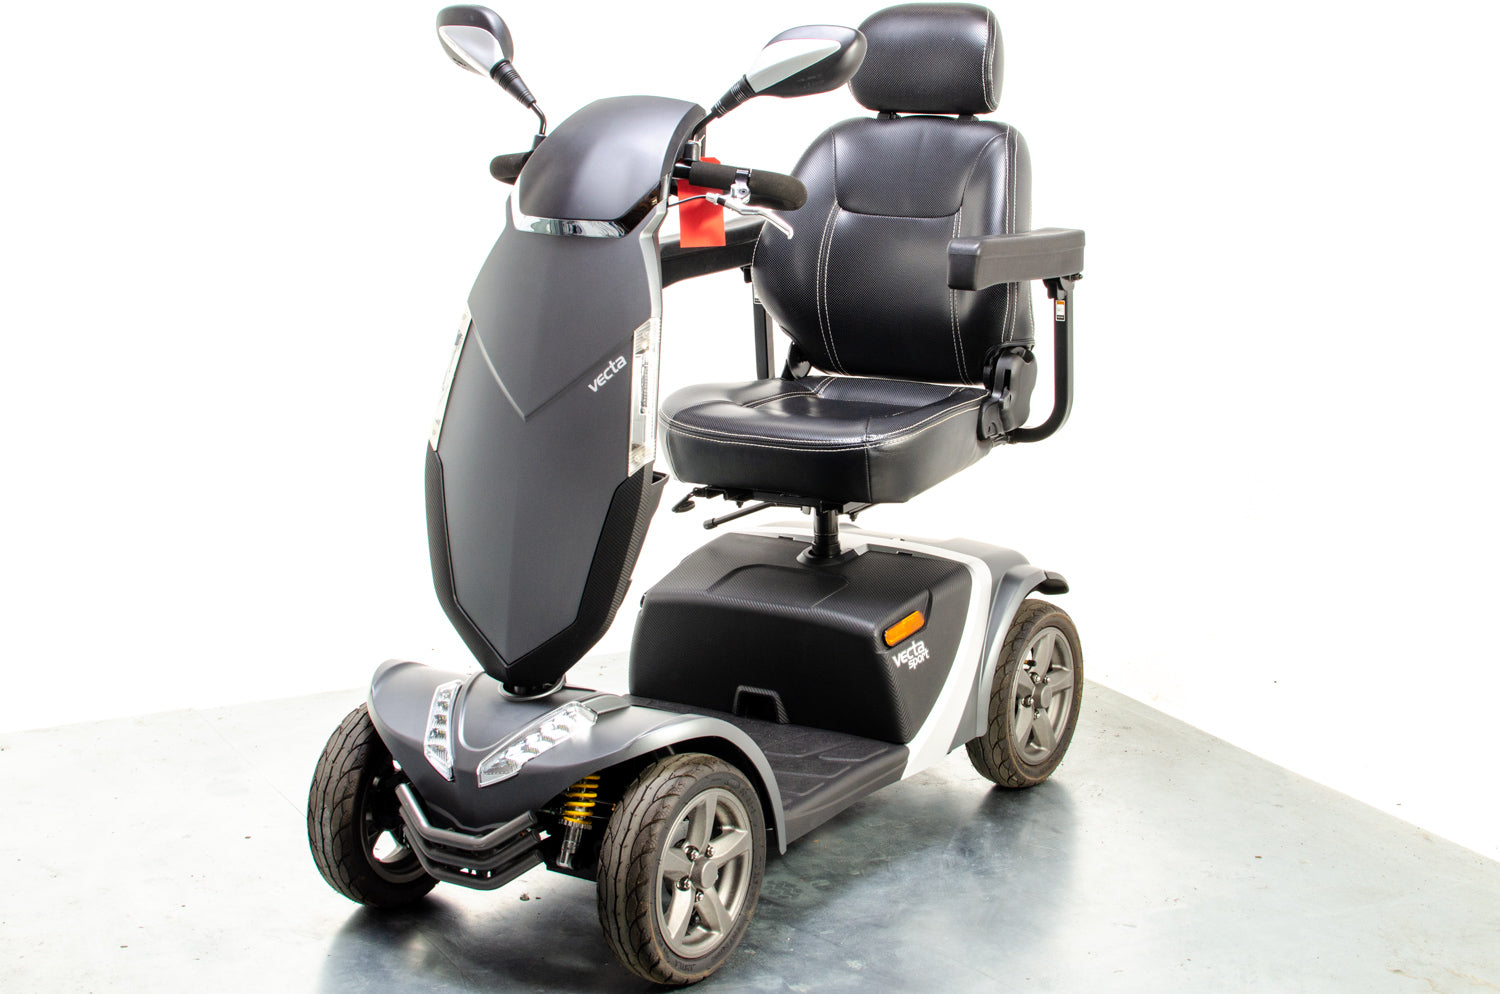 Rascal Vecta Sport Compact Used Electric Mobility Scooter 8mph Max Grip Suspension All-Terrain Matt Grey